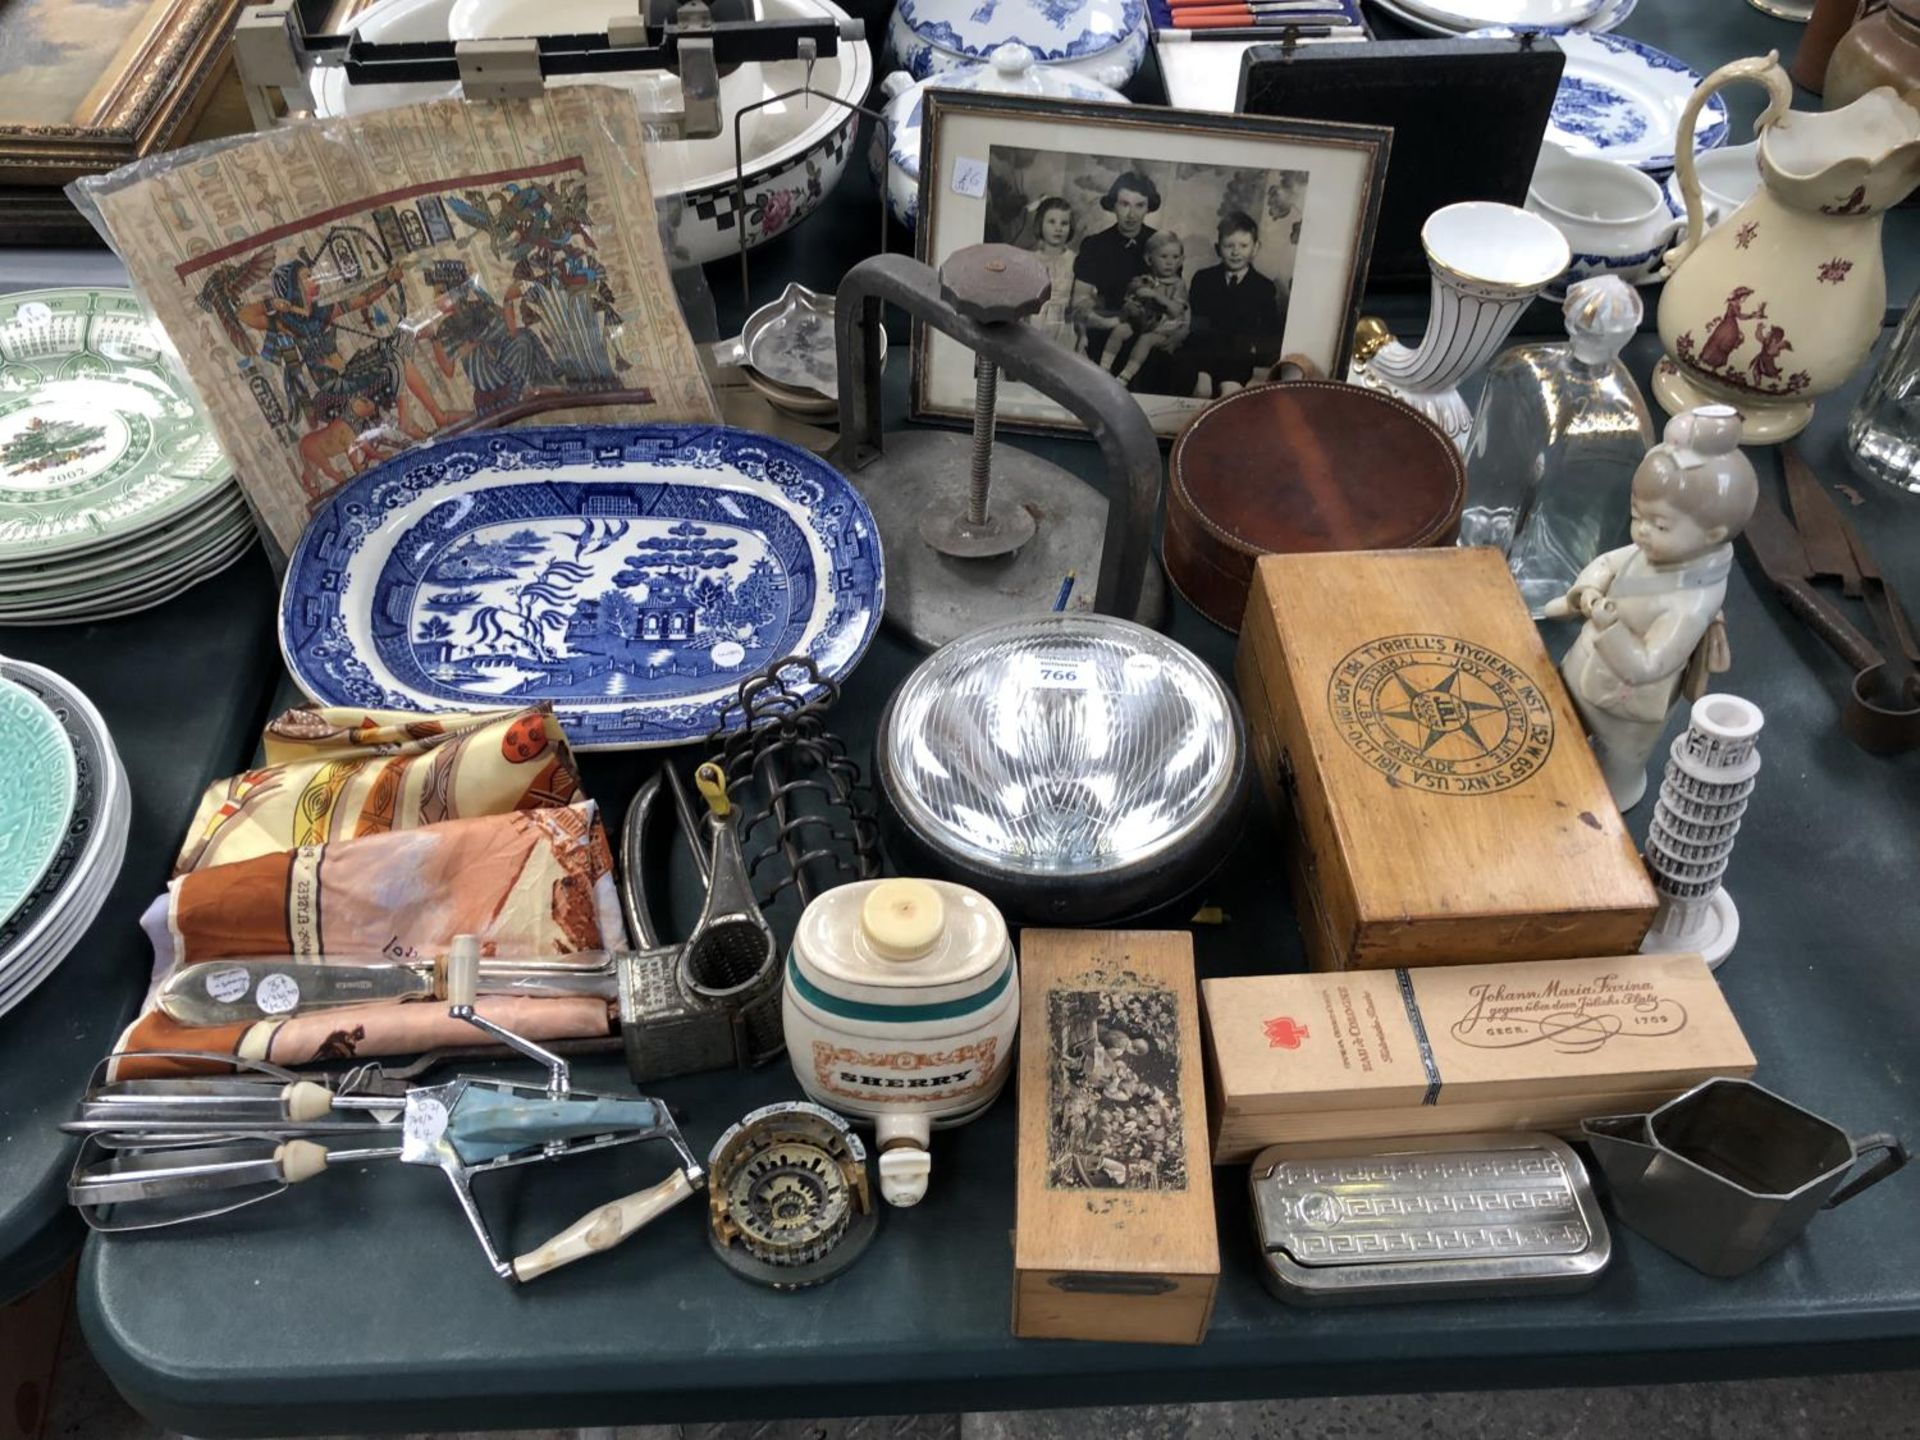 A LARGE MIXED GROUP OF ITEMS - BLUE AND WHITE PLATTER, WOODEN ITEMS ETC